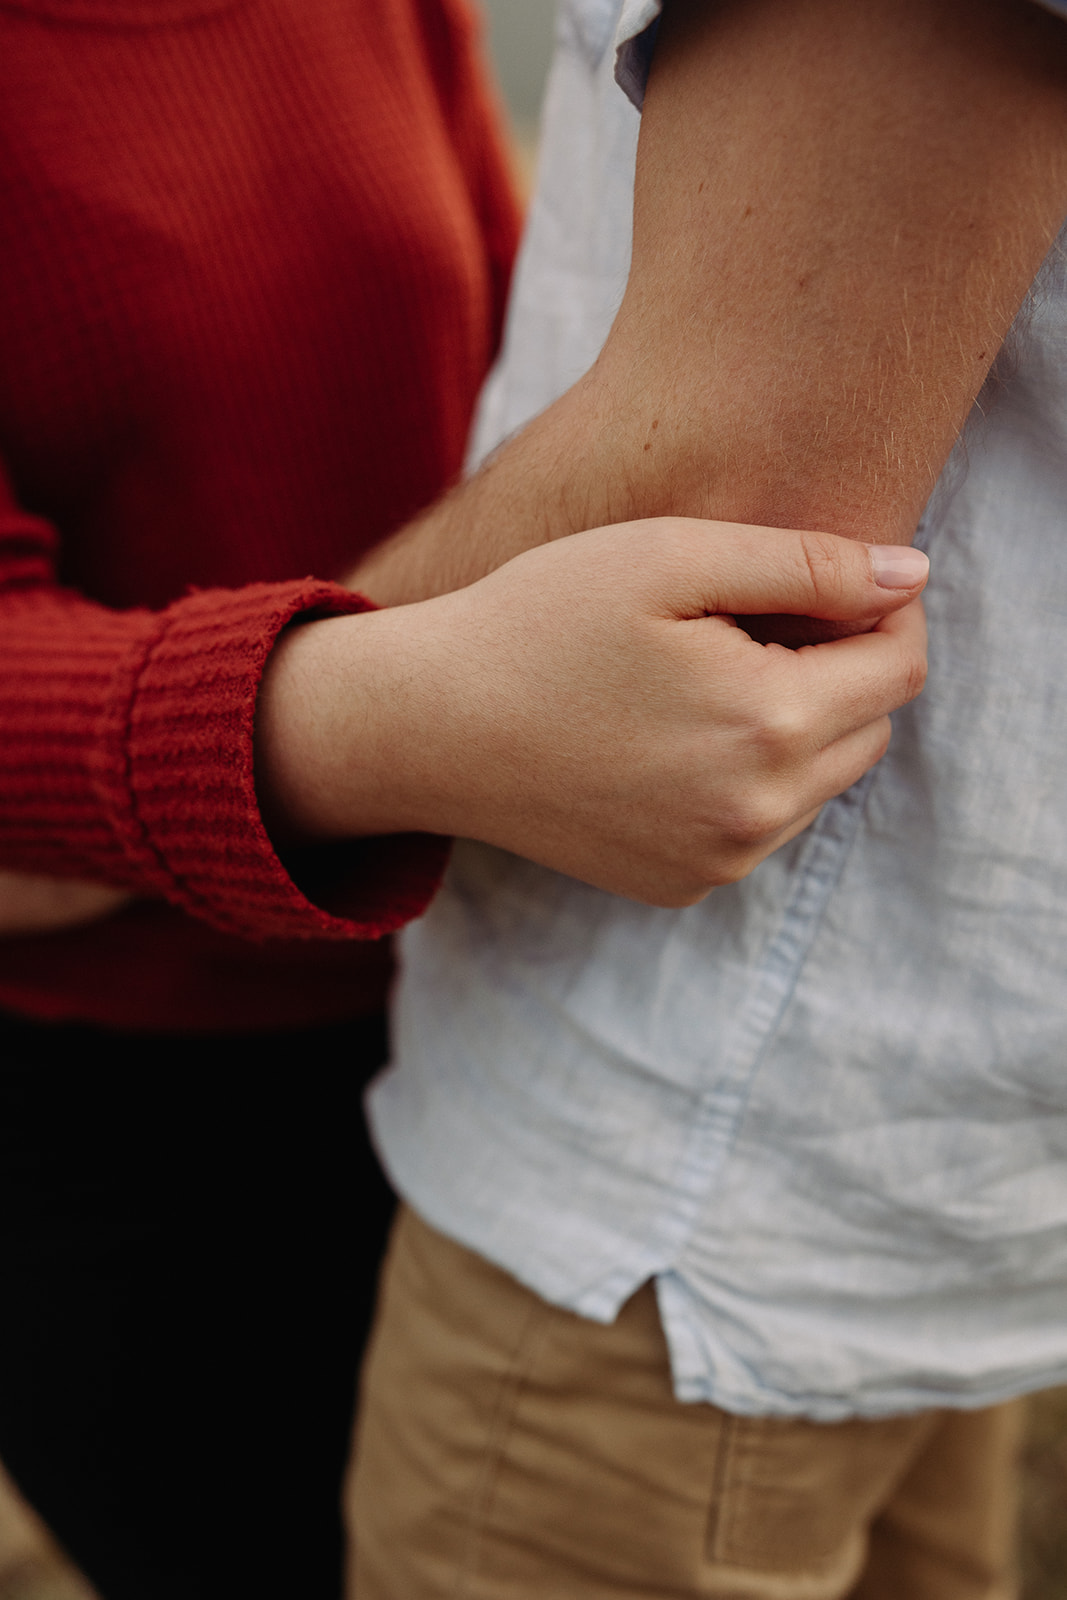 A close up of a woman's hand holding a man's arm